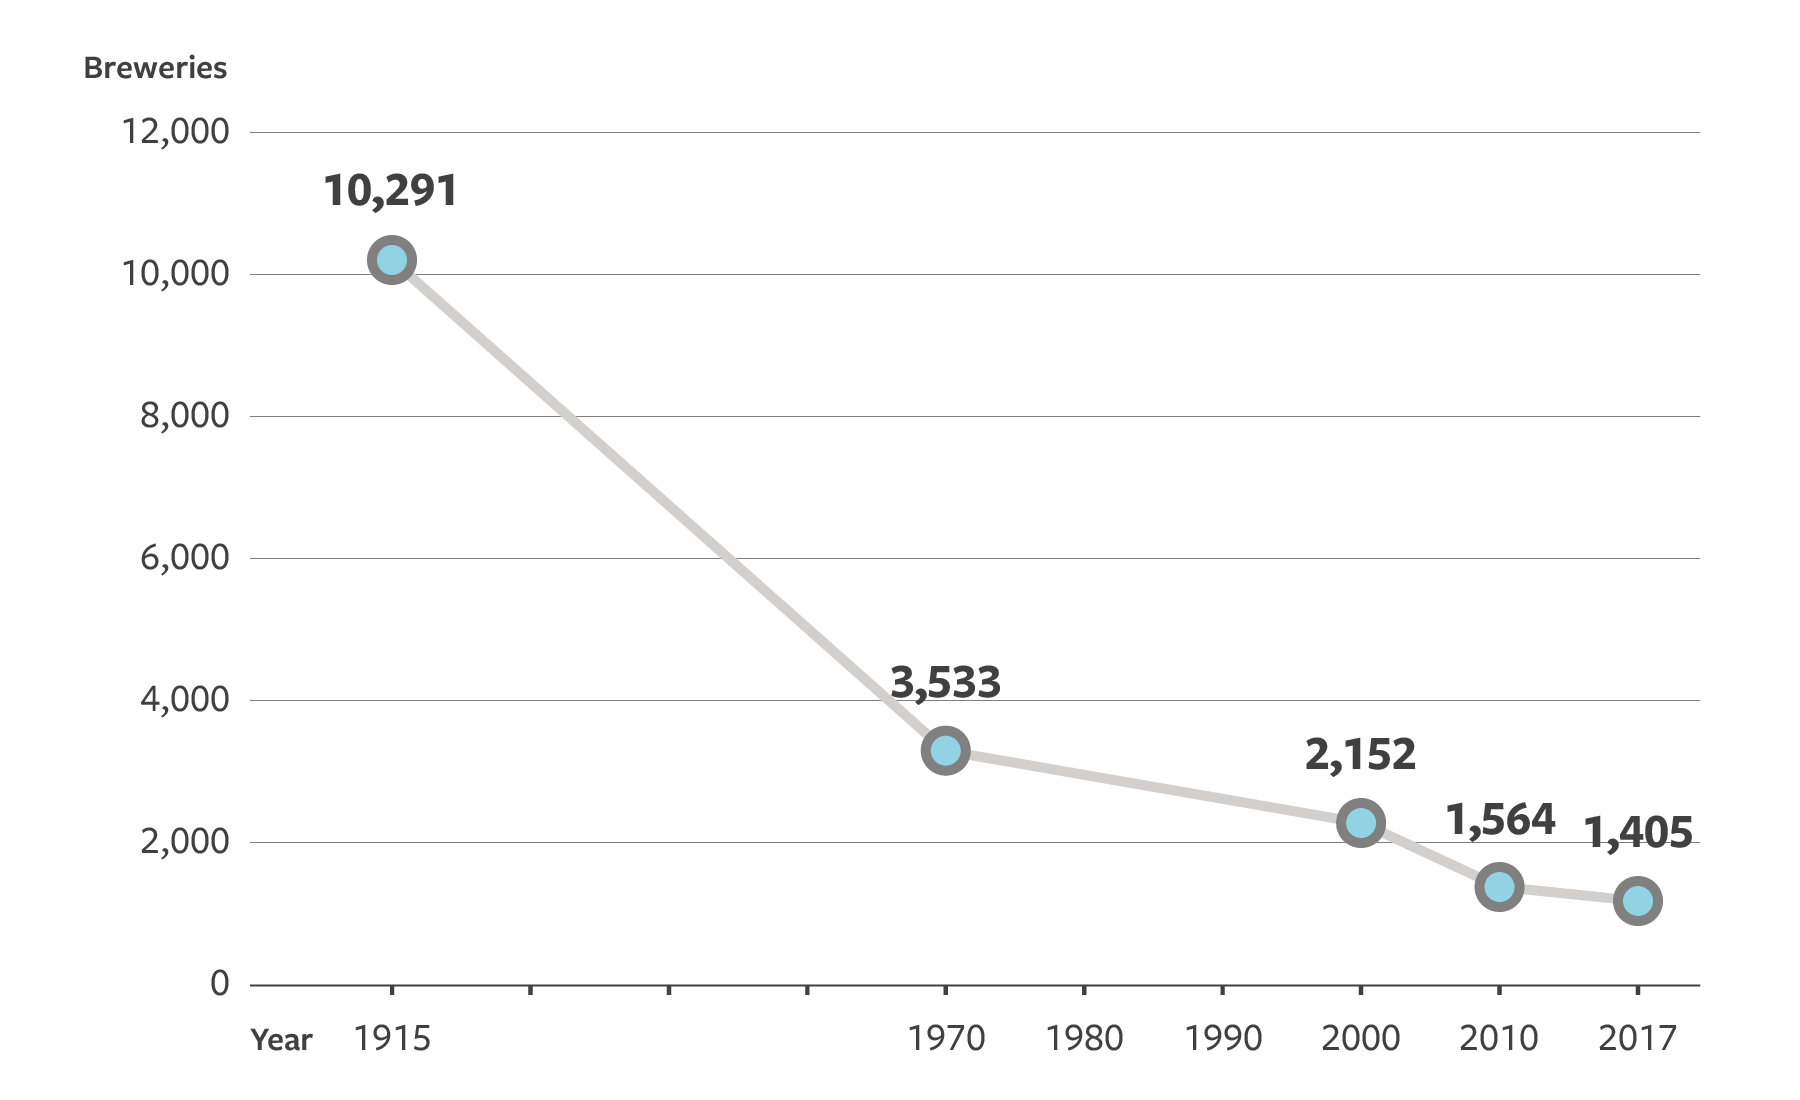 Figure 1: Number of breweries in Japan from 1915 to 2017